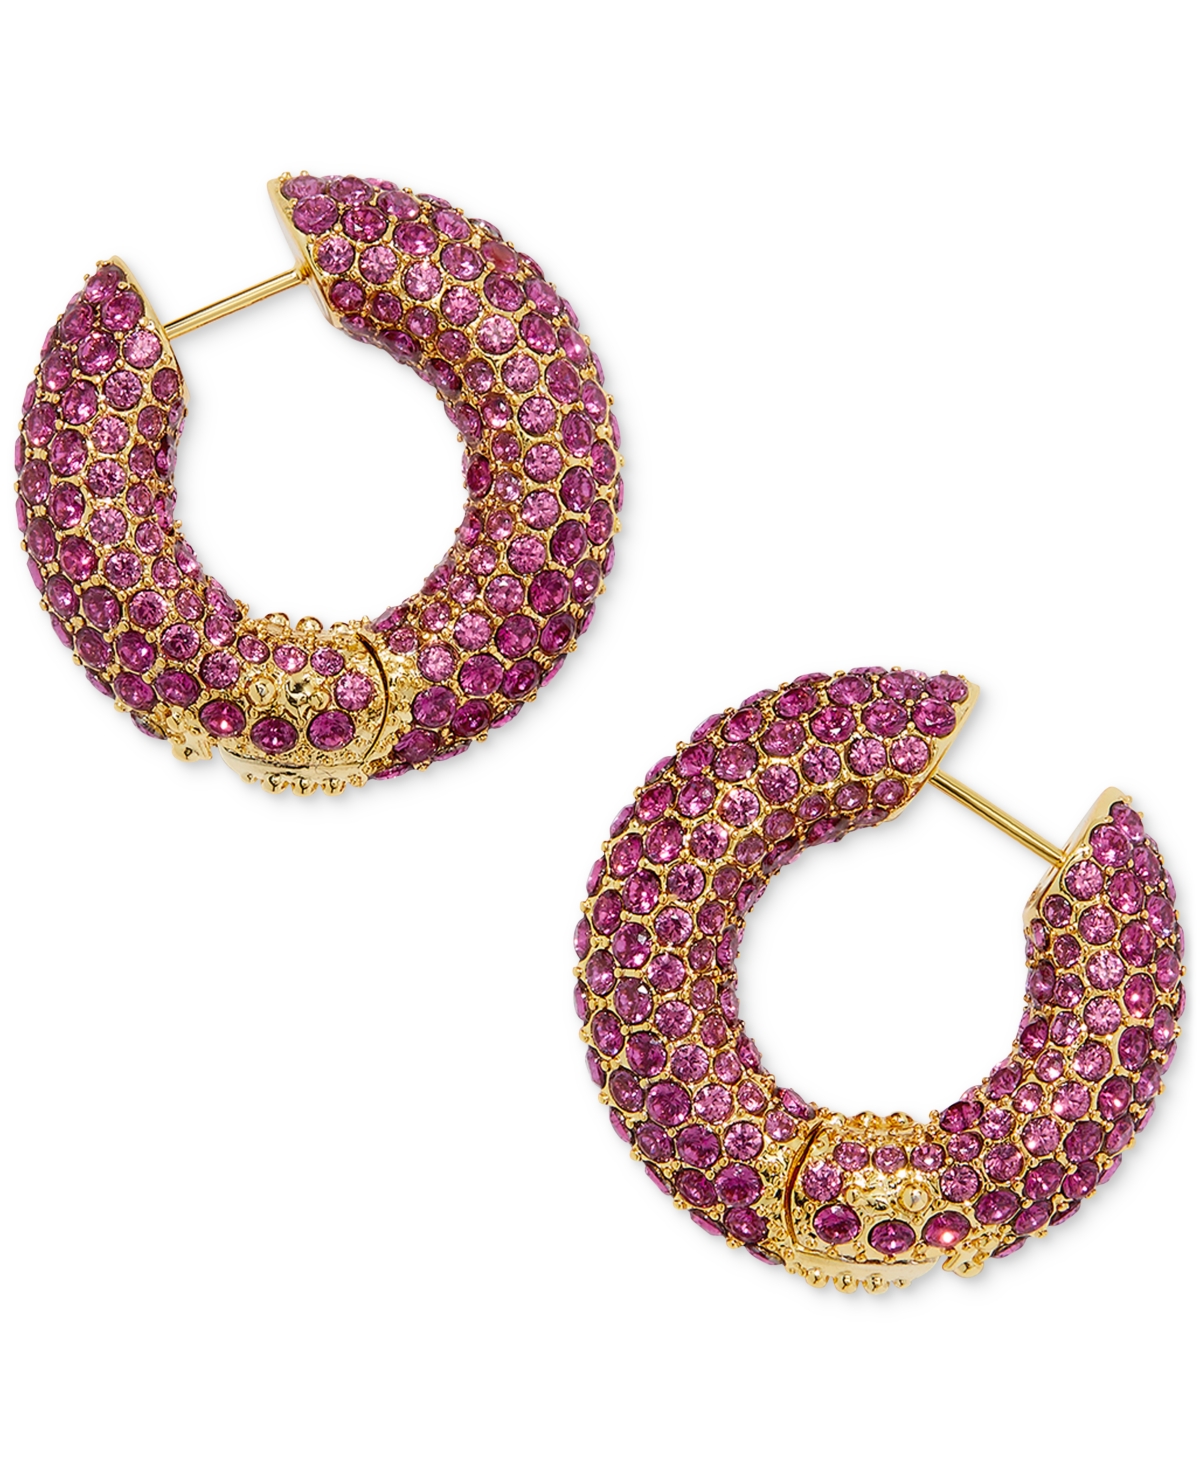 Gold-Tone Mikki Pave Small Hoop Earrings, 0.6" - Gold Green